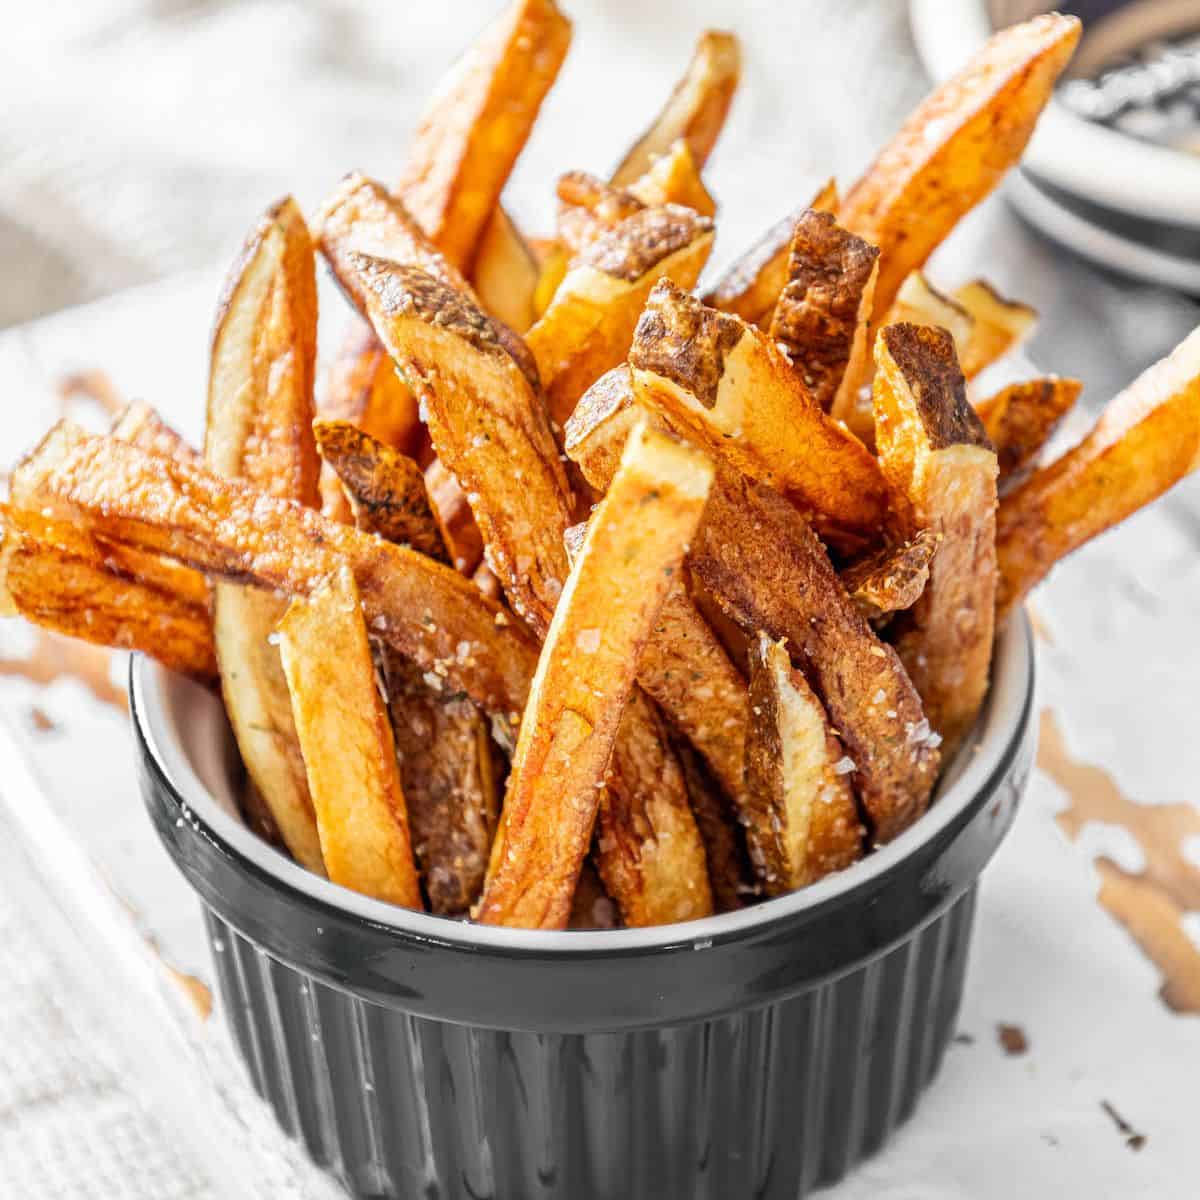 Check out our crush fries next time you come in! The ULTIMATE